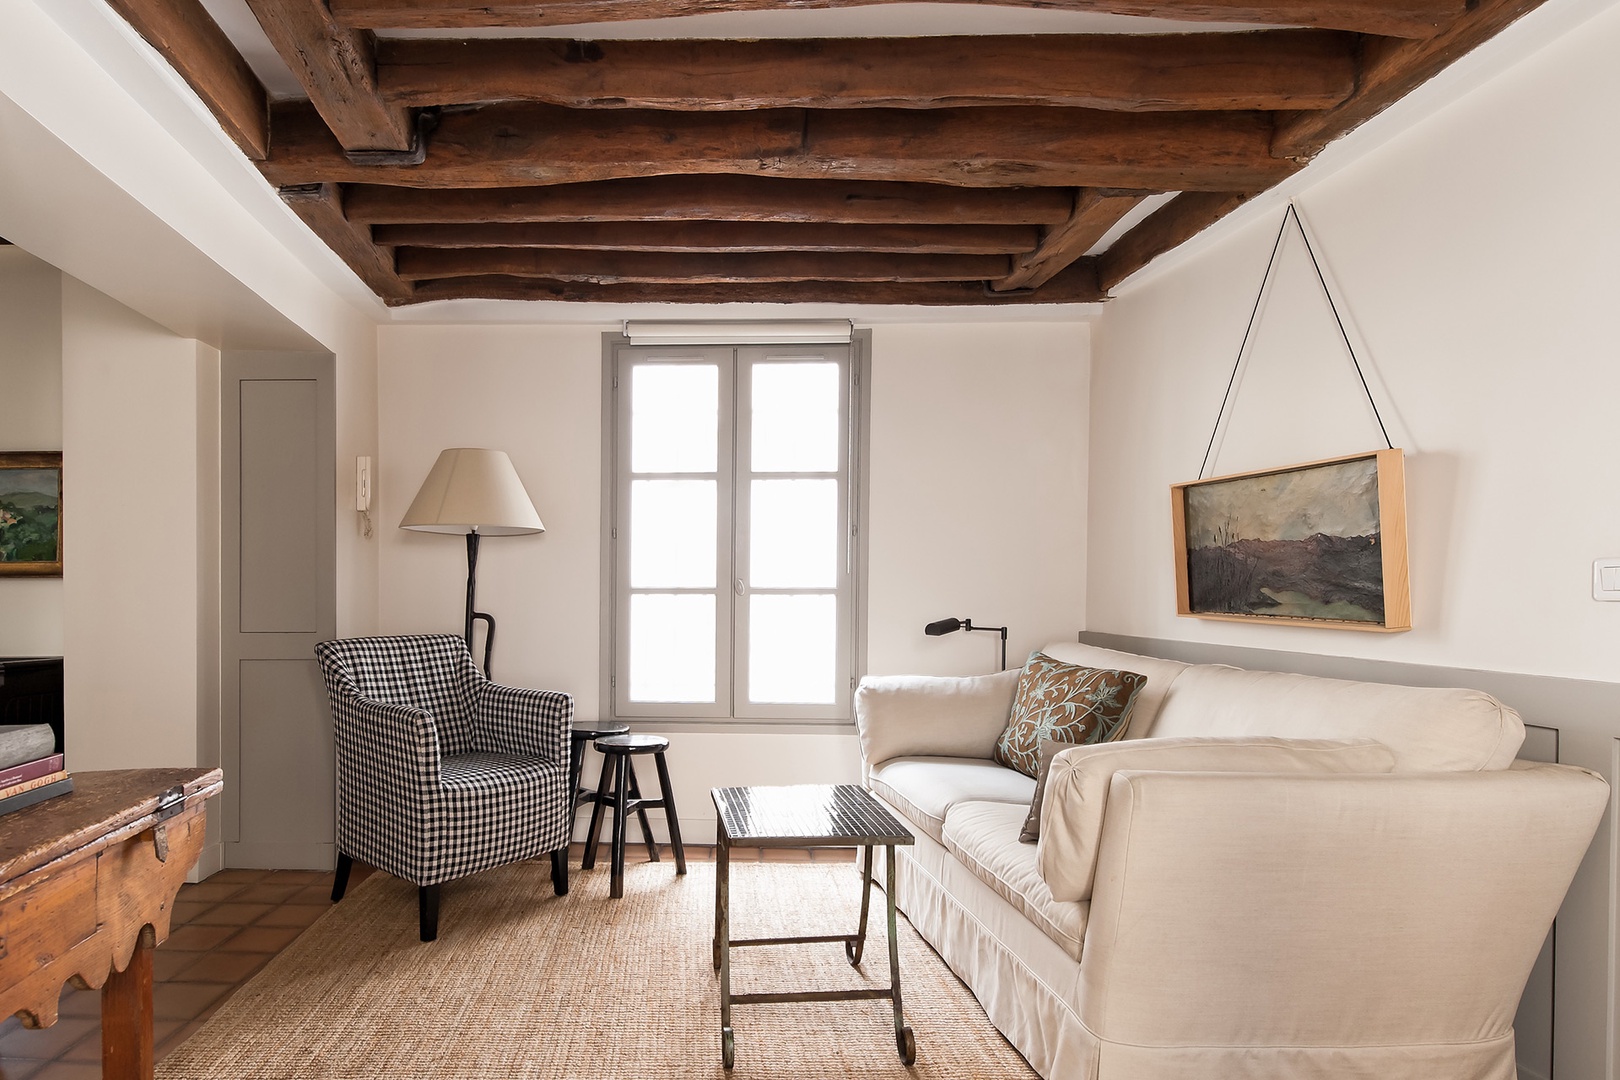 You will love the wooden ceiling beams that add original charm.